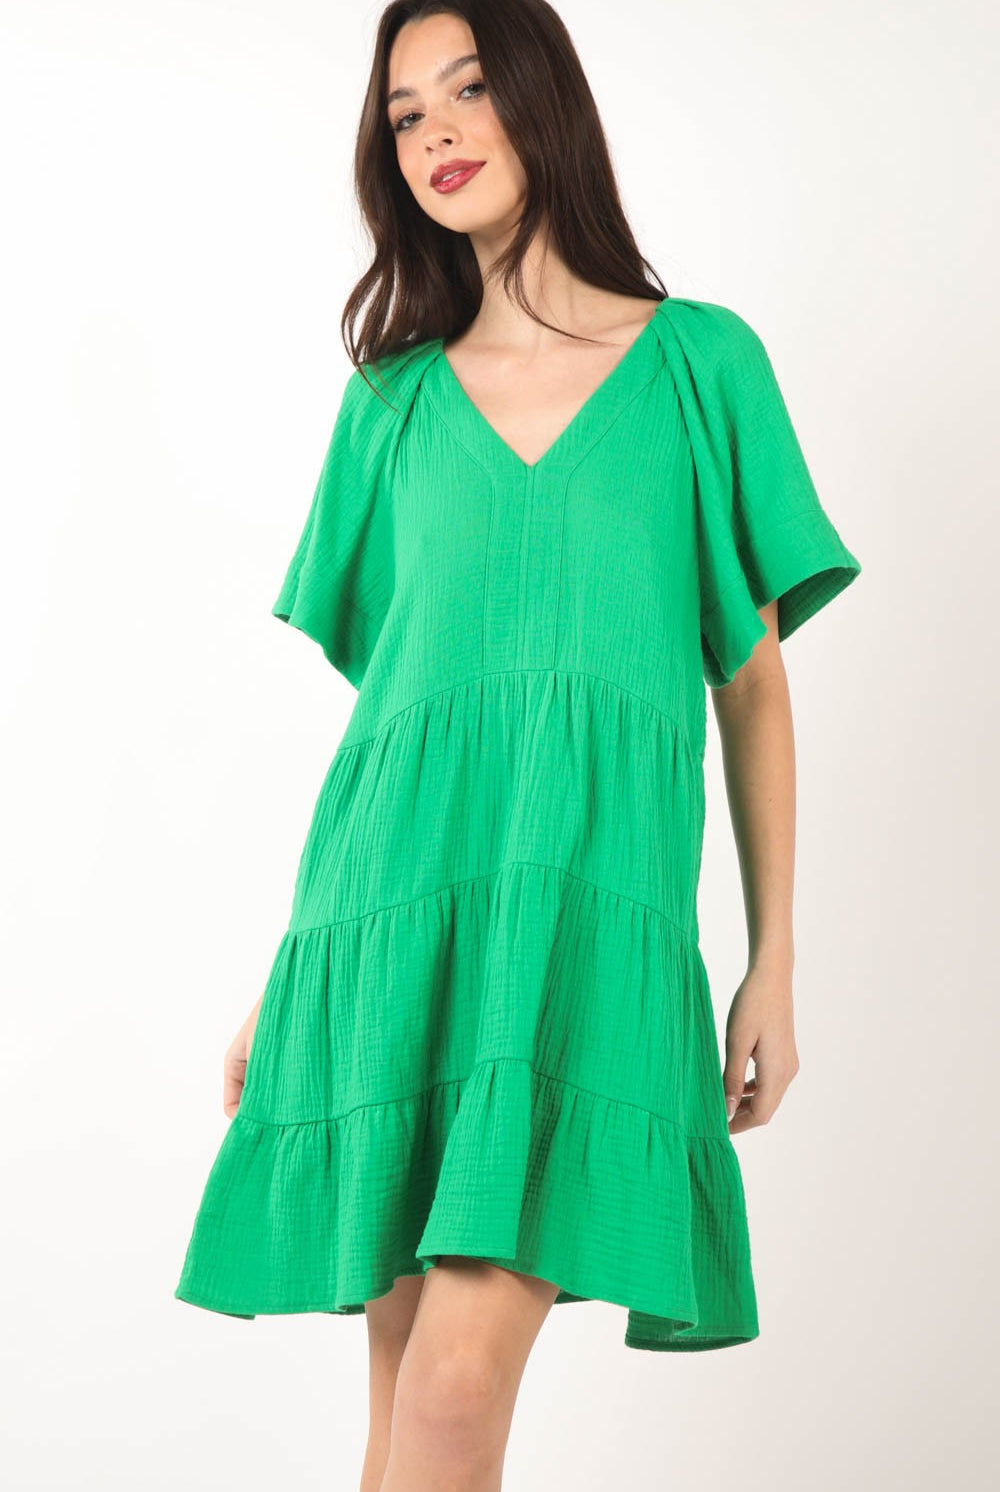 Model wearing a vibrant green, tiered dress with a V-neckline and short sleeves, perfect for a fresh and stylish summer look.